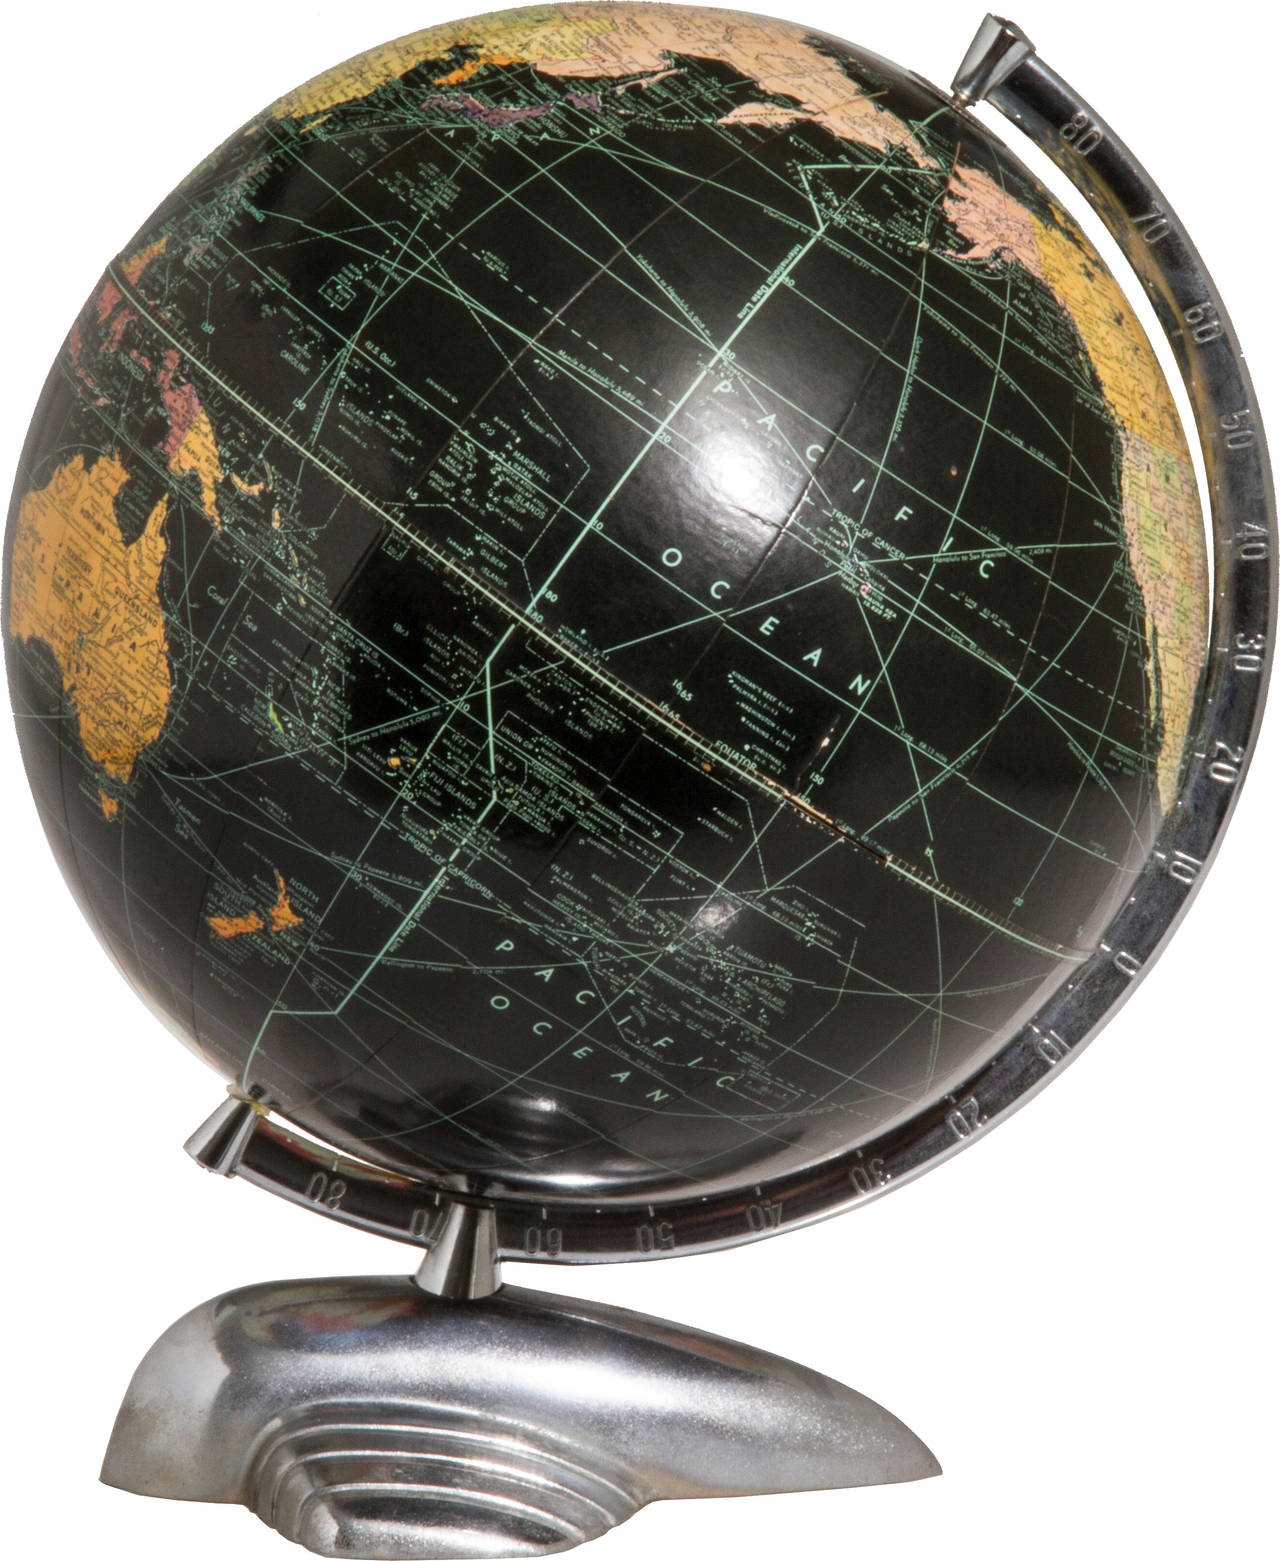 This is a wonderful globe with a machine age airplane chromed metal base made by the Weber Costello Company of Chicago Heights, Illinois.